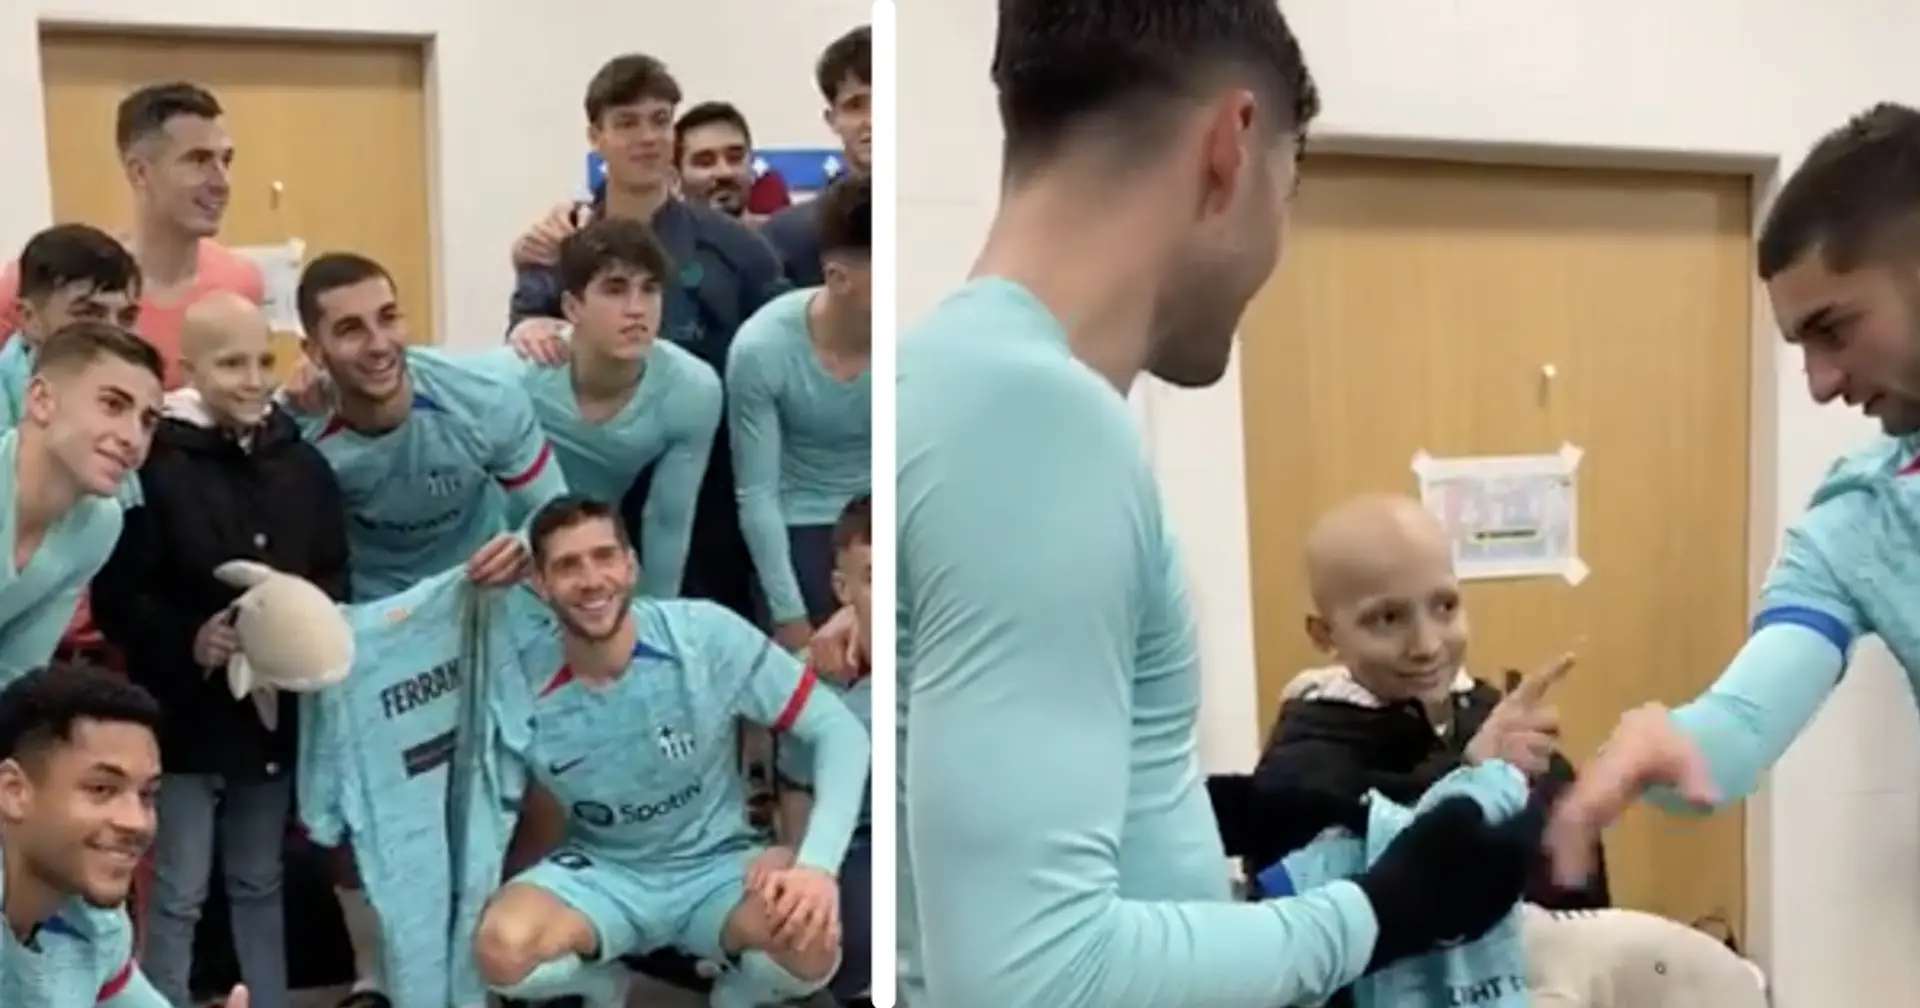 Barca players celebrate Unionistas win with cancer-stricken girl Ferran Torres gifted jersey to